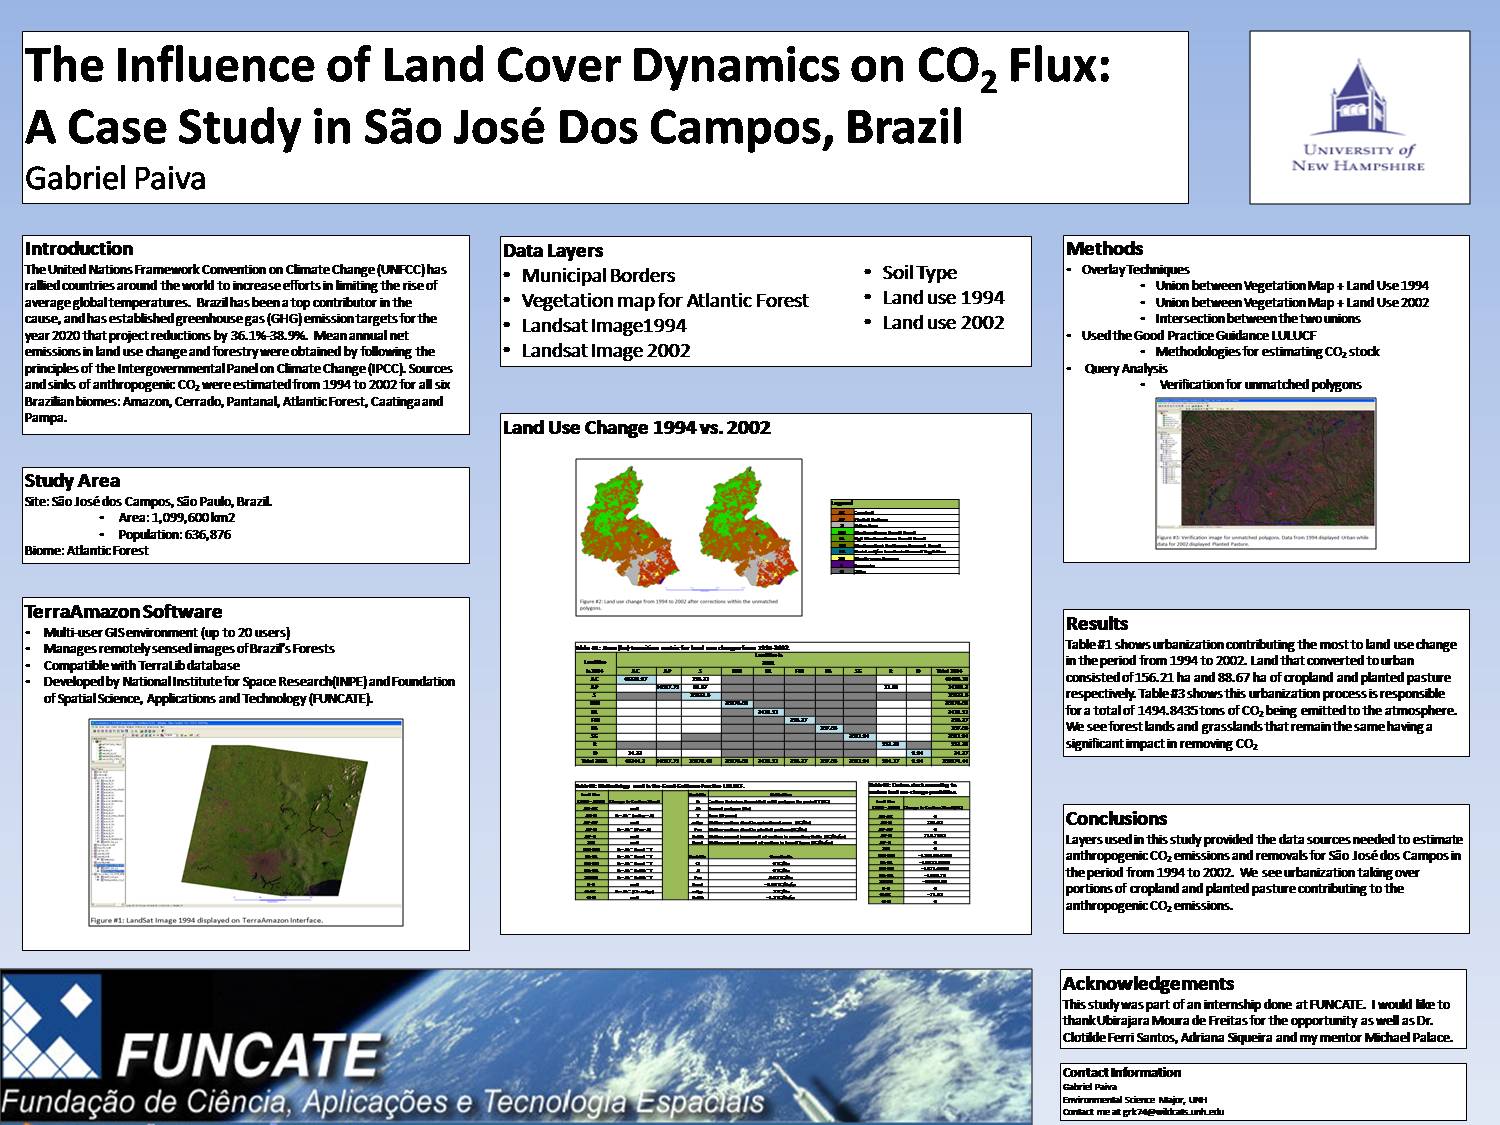 The Influence Of Land Cover Dynamics On Co2 Flux:  A Case Study In São José Dos Campos, Brazil by palace